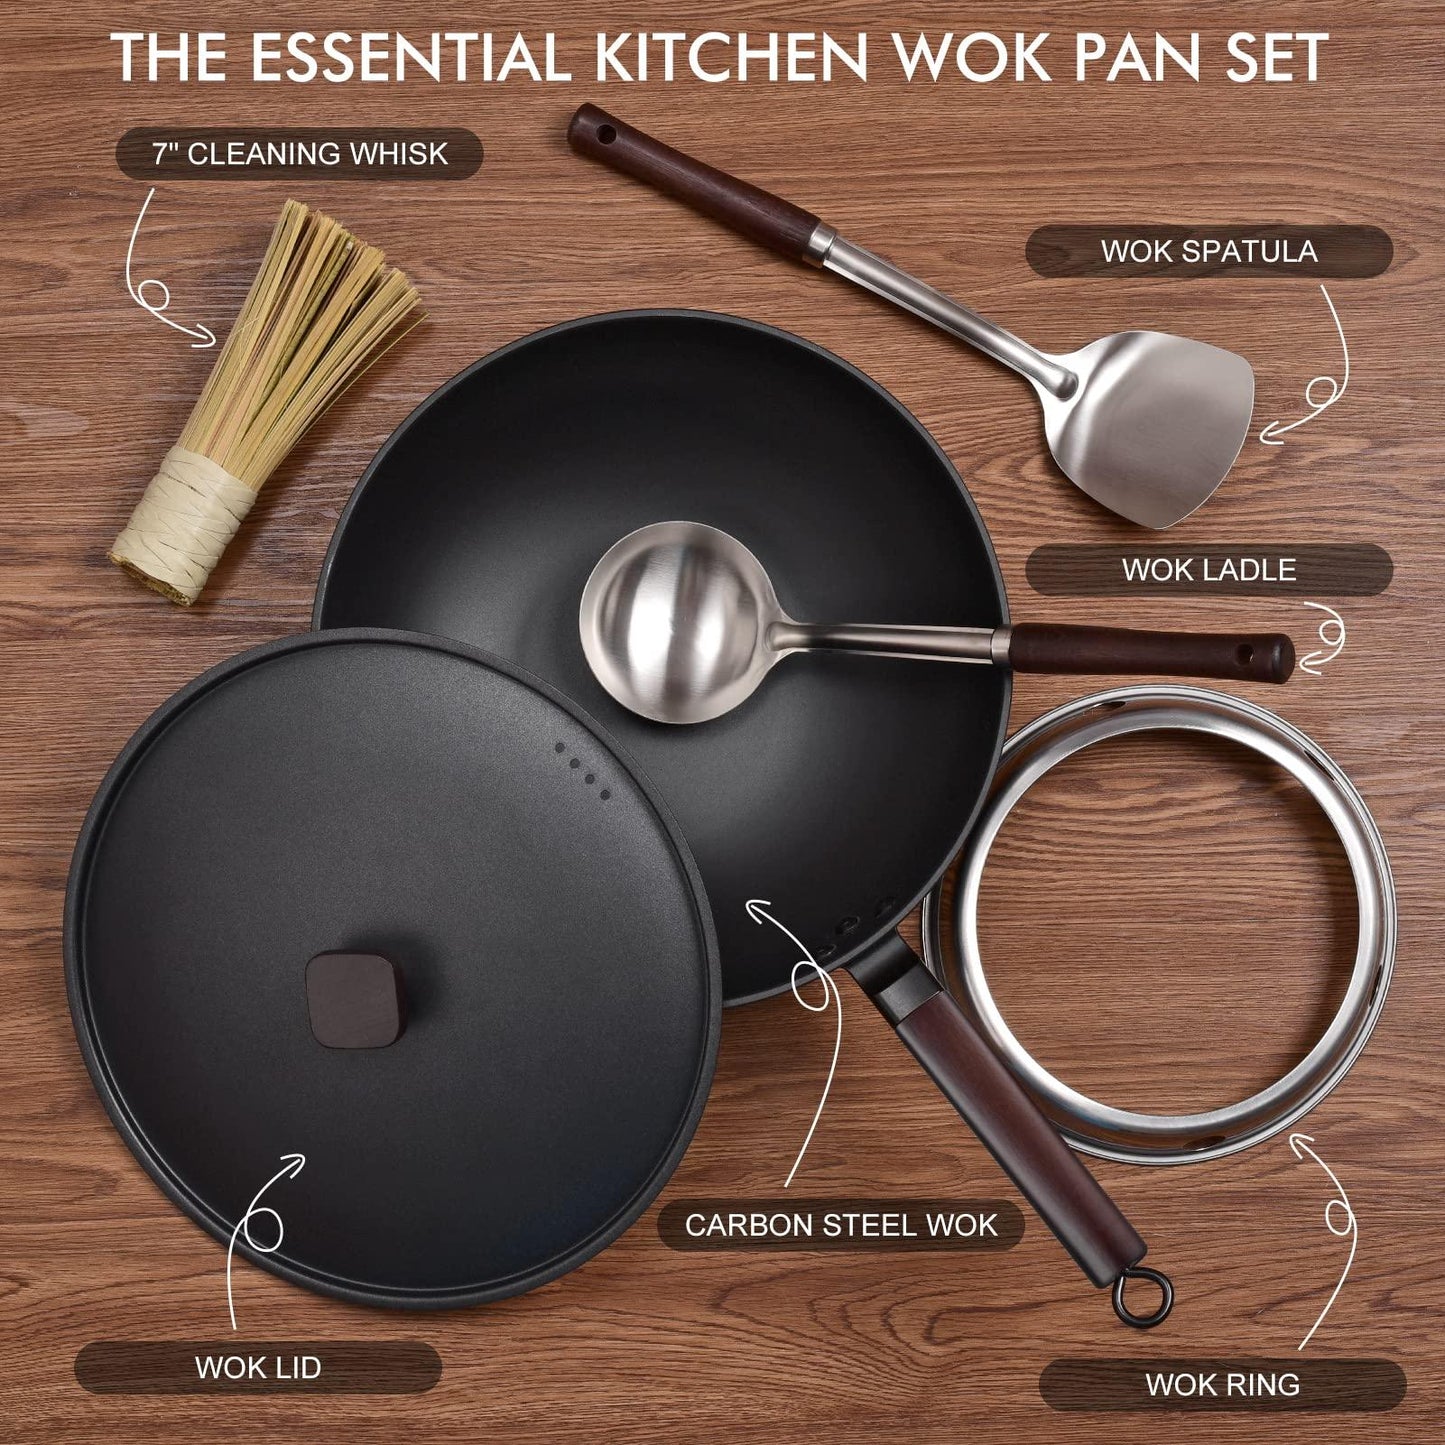 Carbon Steel Wok Pan - 12.9” Wok Pan with Lid, Woks & Stir-fry Pans, No Chemical Coated Chinese Wok with 4 Cookware Accessories Flat Bottom Wok for Induction, Electric, Gas, All Stoves - CookCave